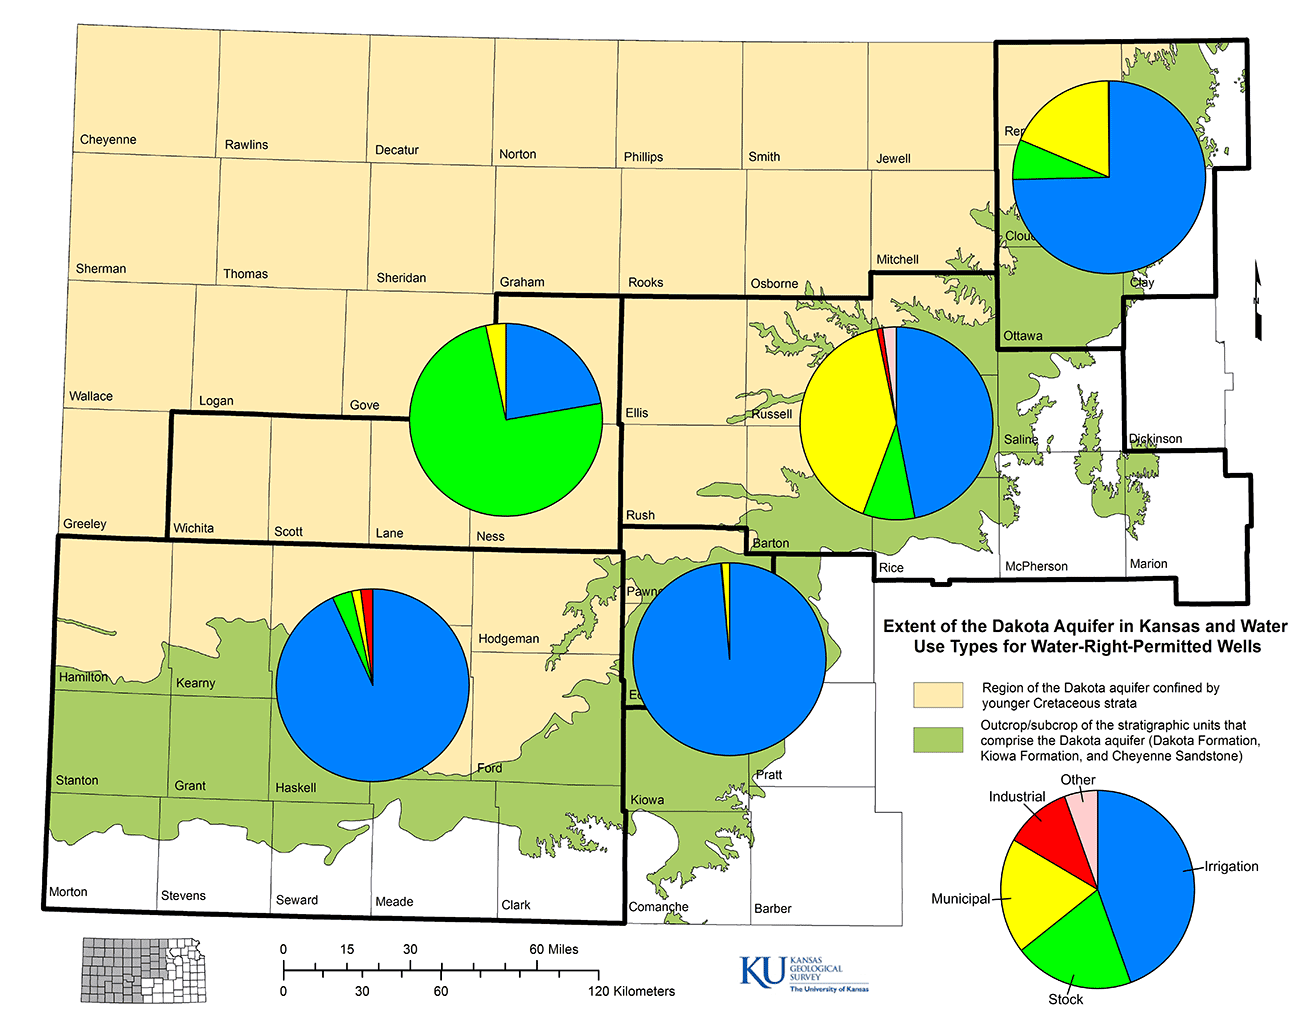 Mean 2006-2010 percentage of water use from the Dakota aquifer for different types of water-right-permitted wells.